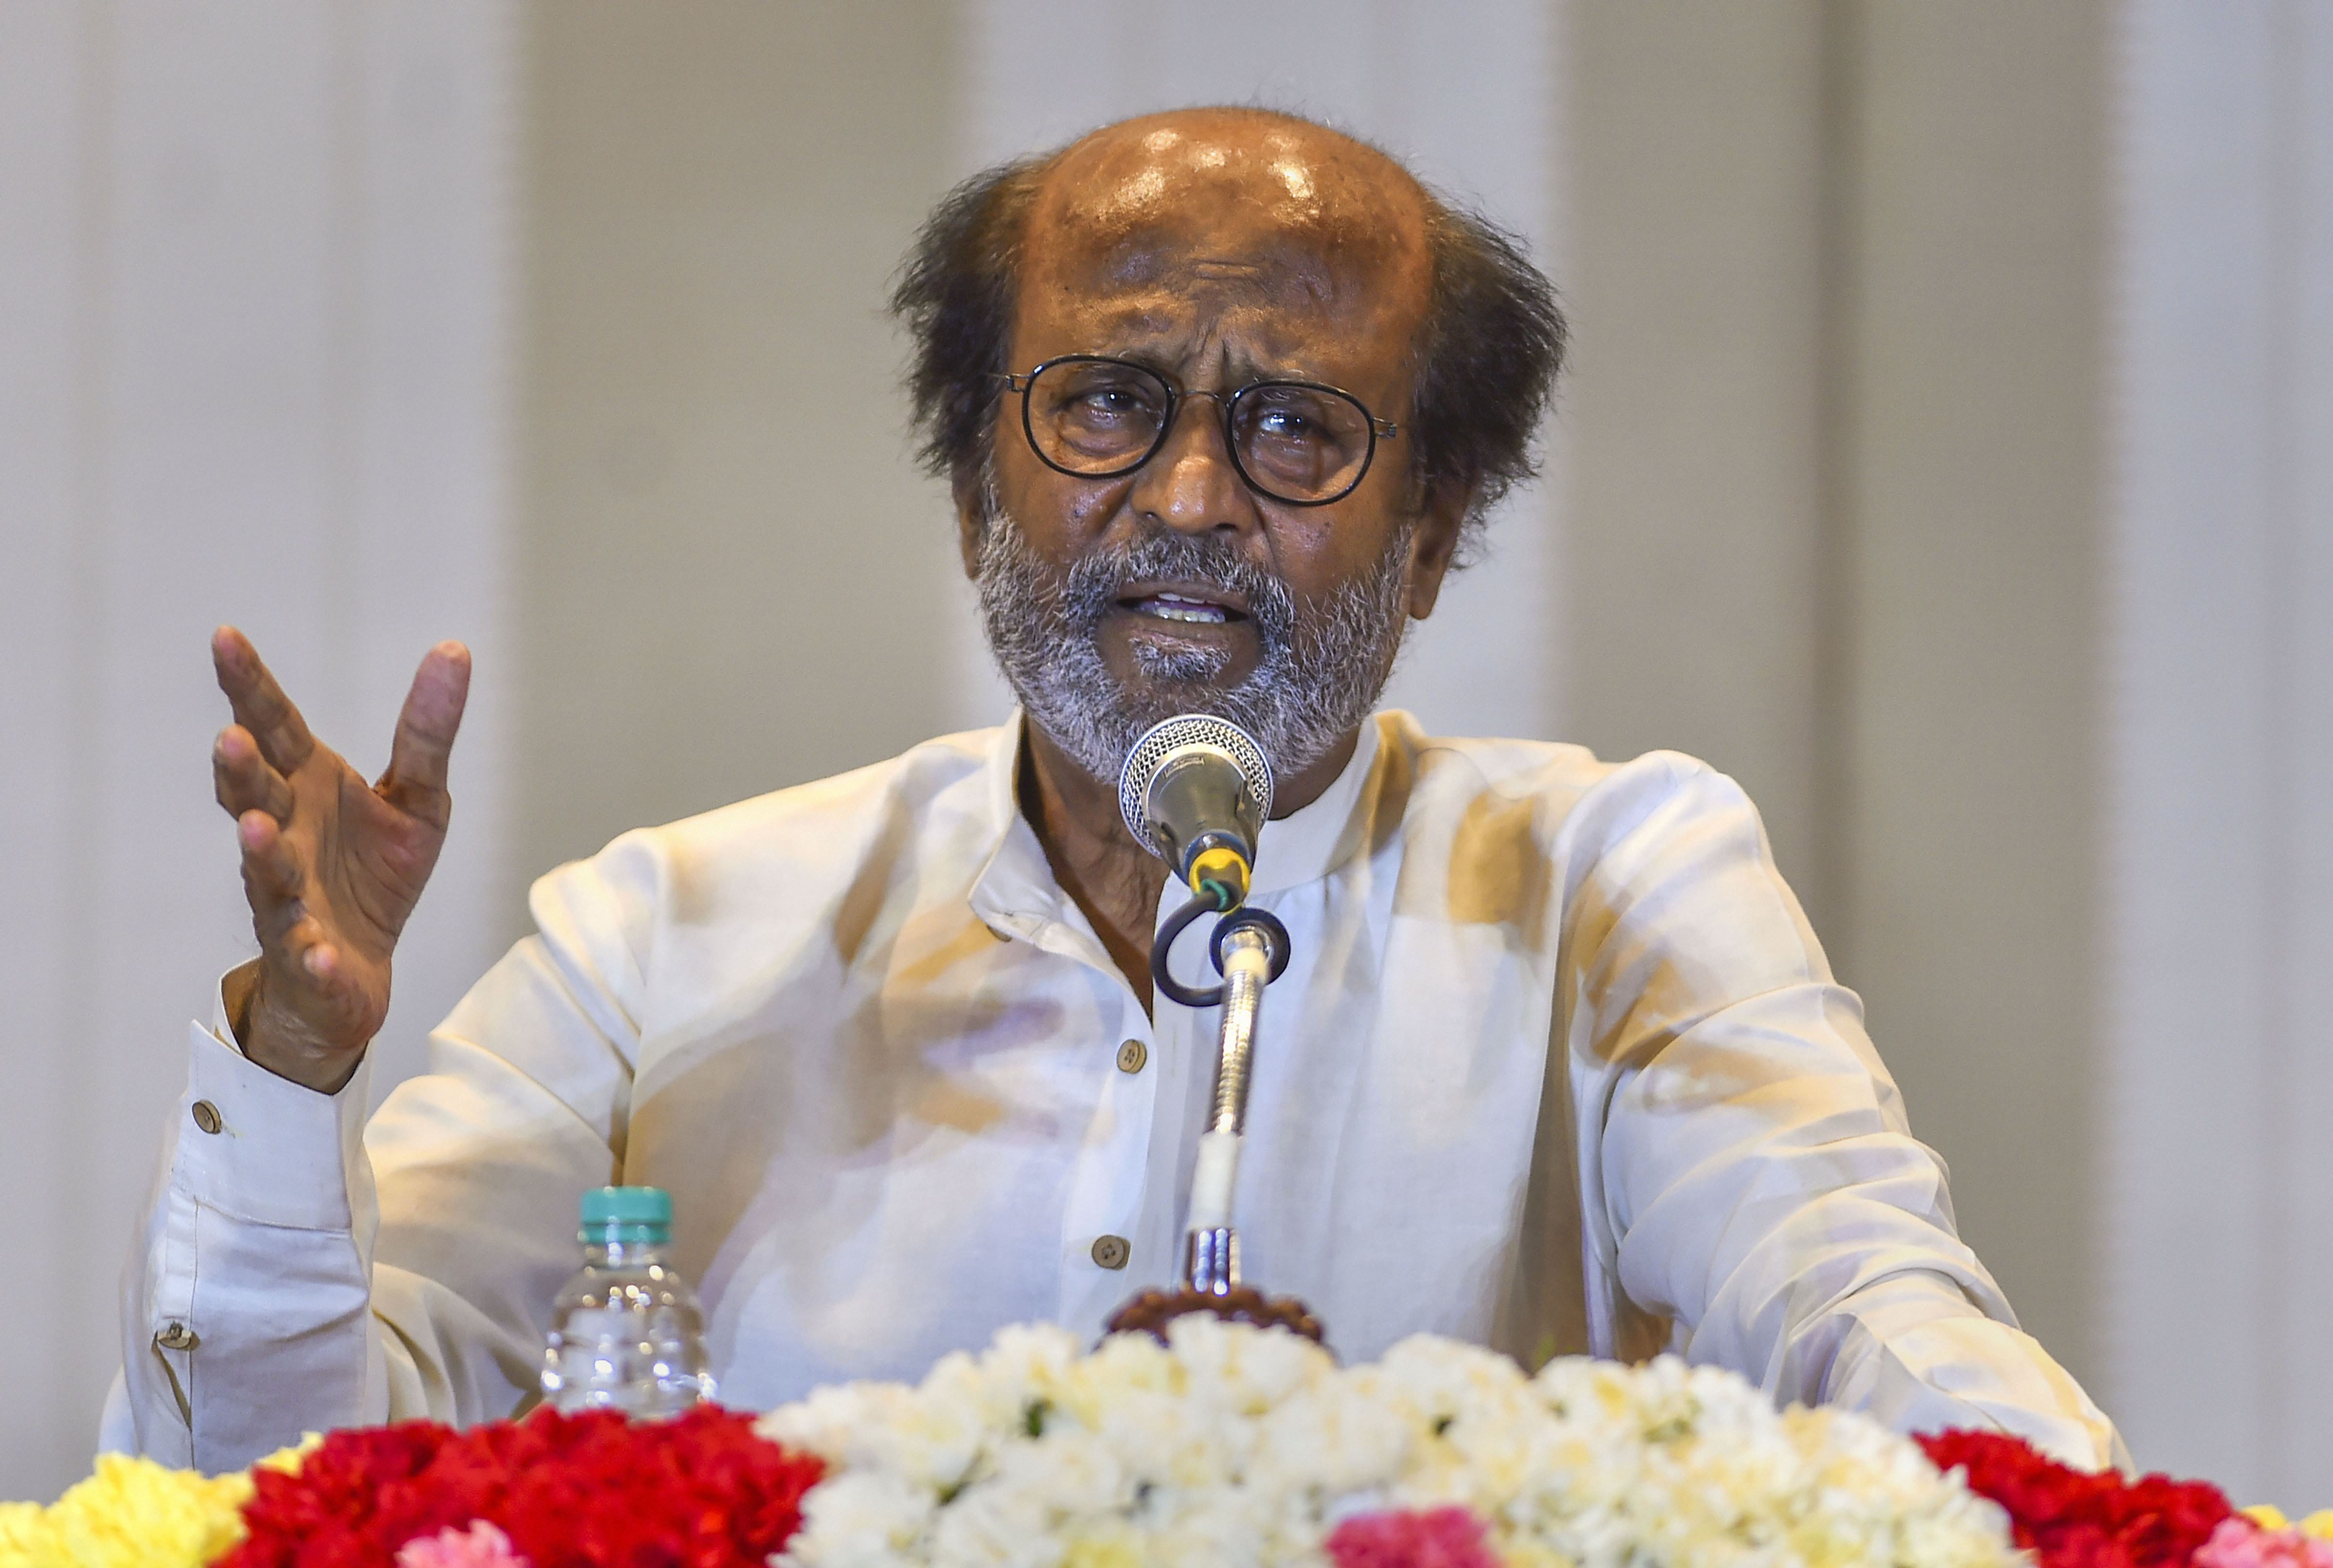 Rajinikanth admitted to hospital with fluctuating blood pressure